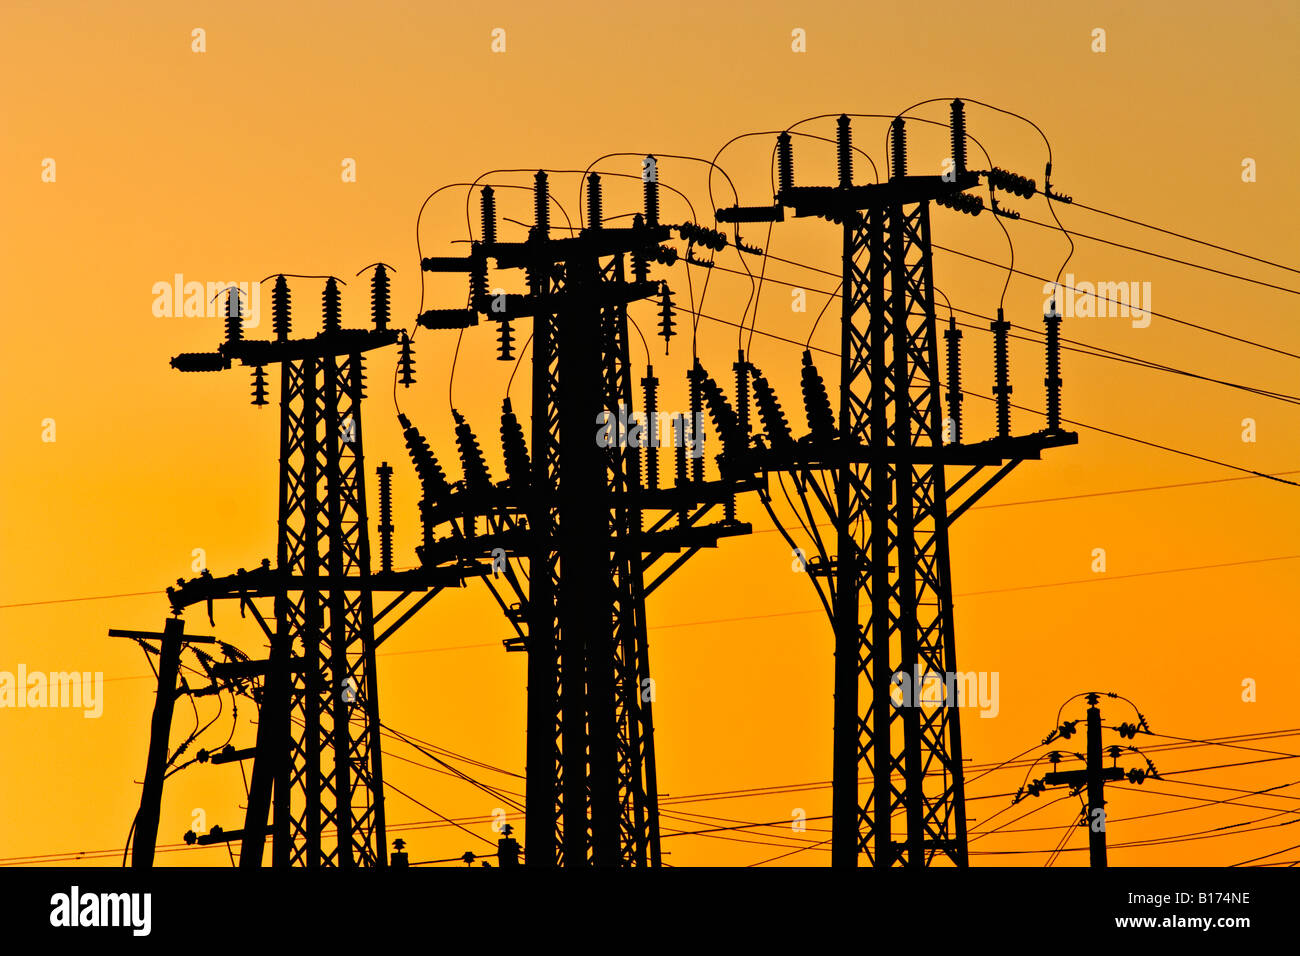 Energy Industry / Electricity. High voltage Transmission Towers silhouetted at sunset. Stock Photo